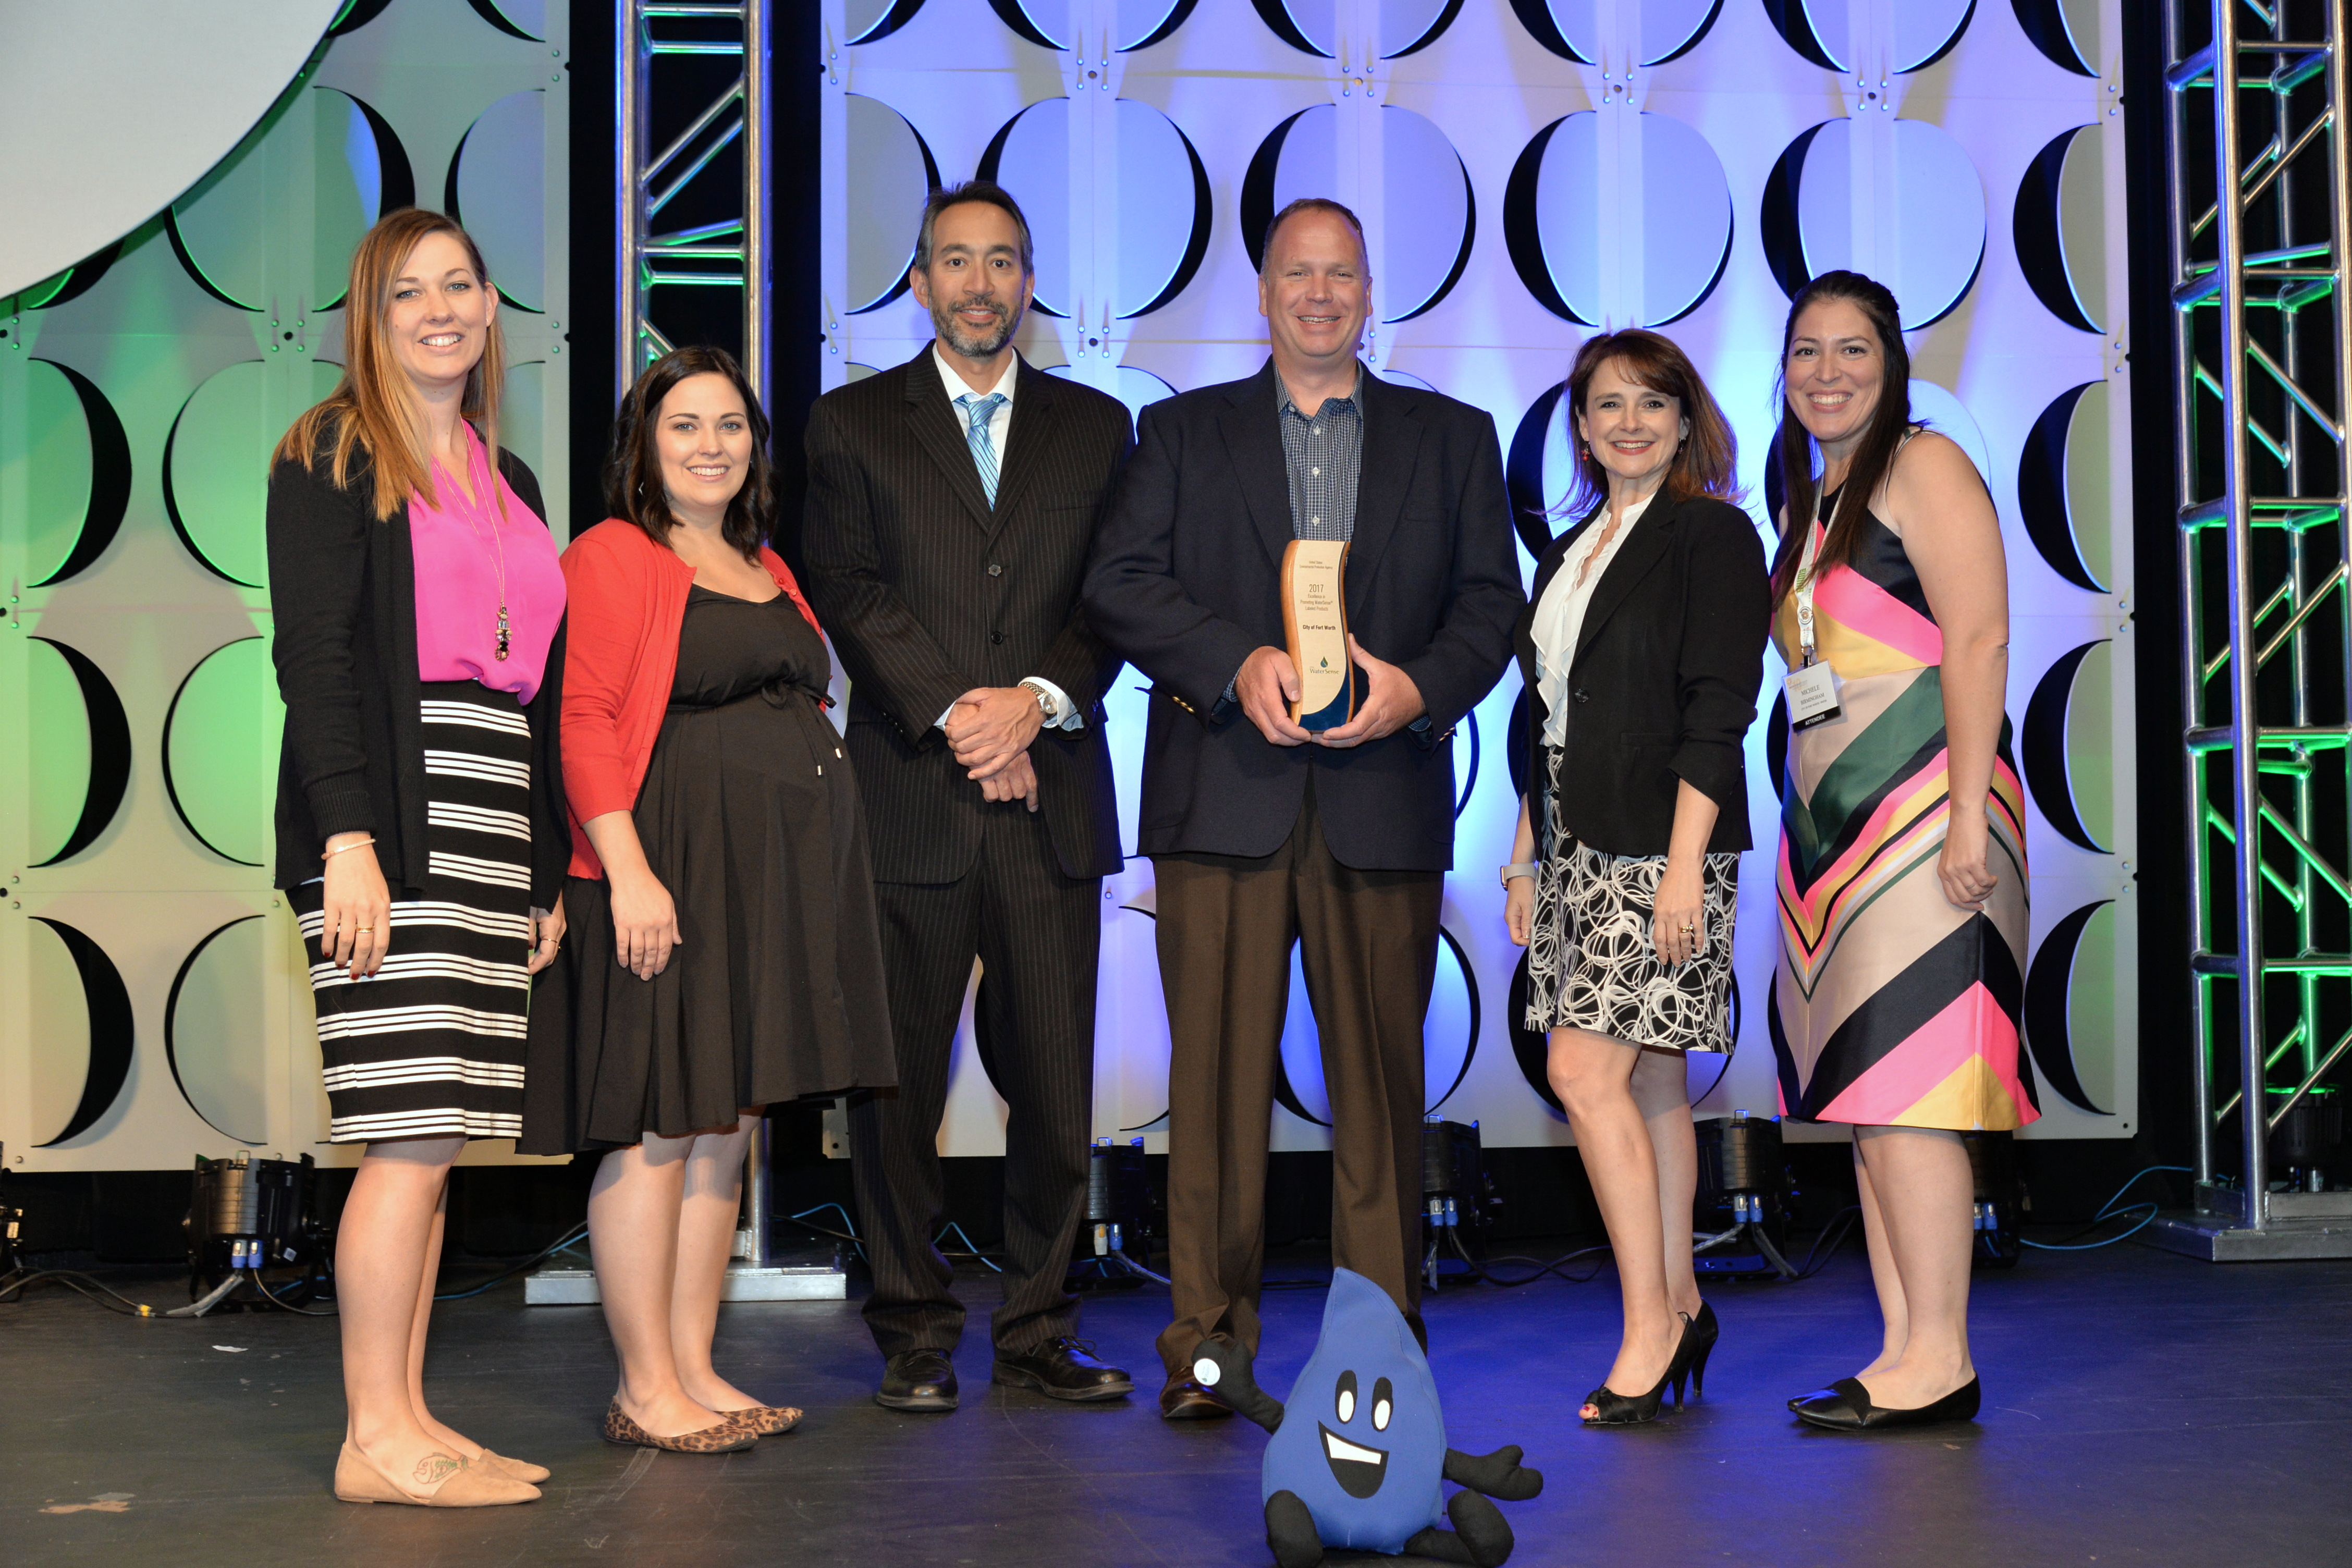 Excellence in Promoting WaterSense Labeled Products Award winner, City of Fort Worth.